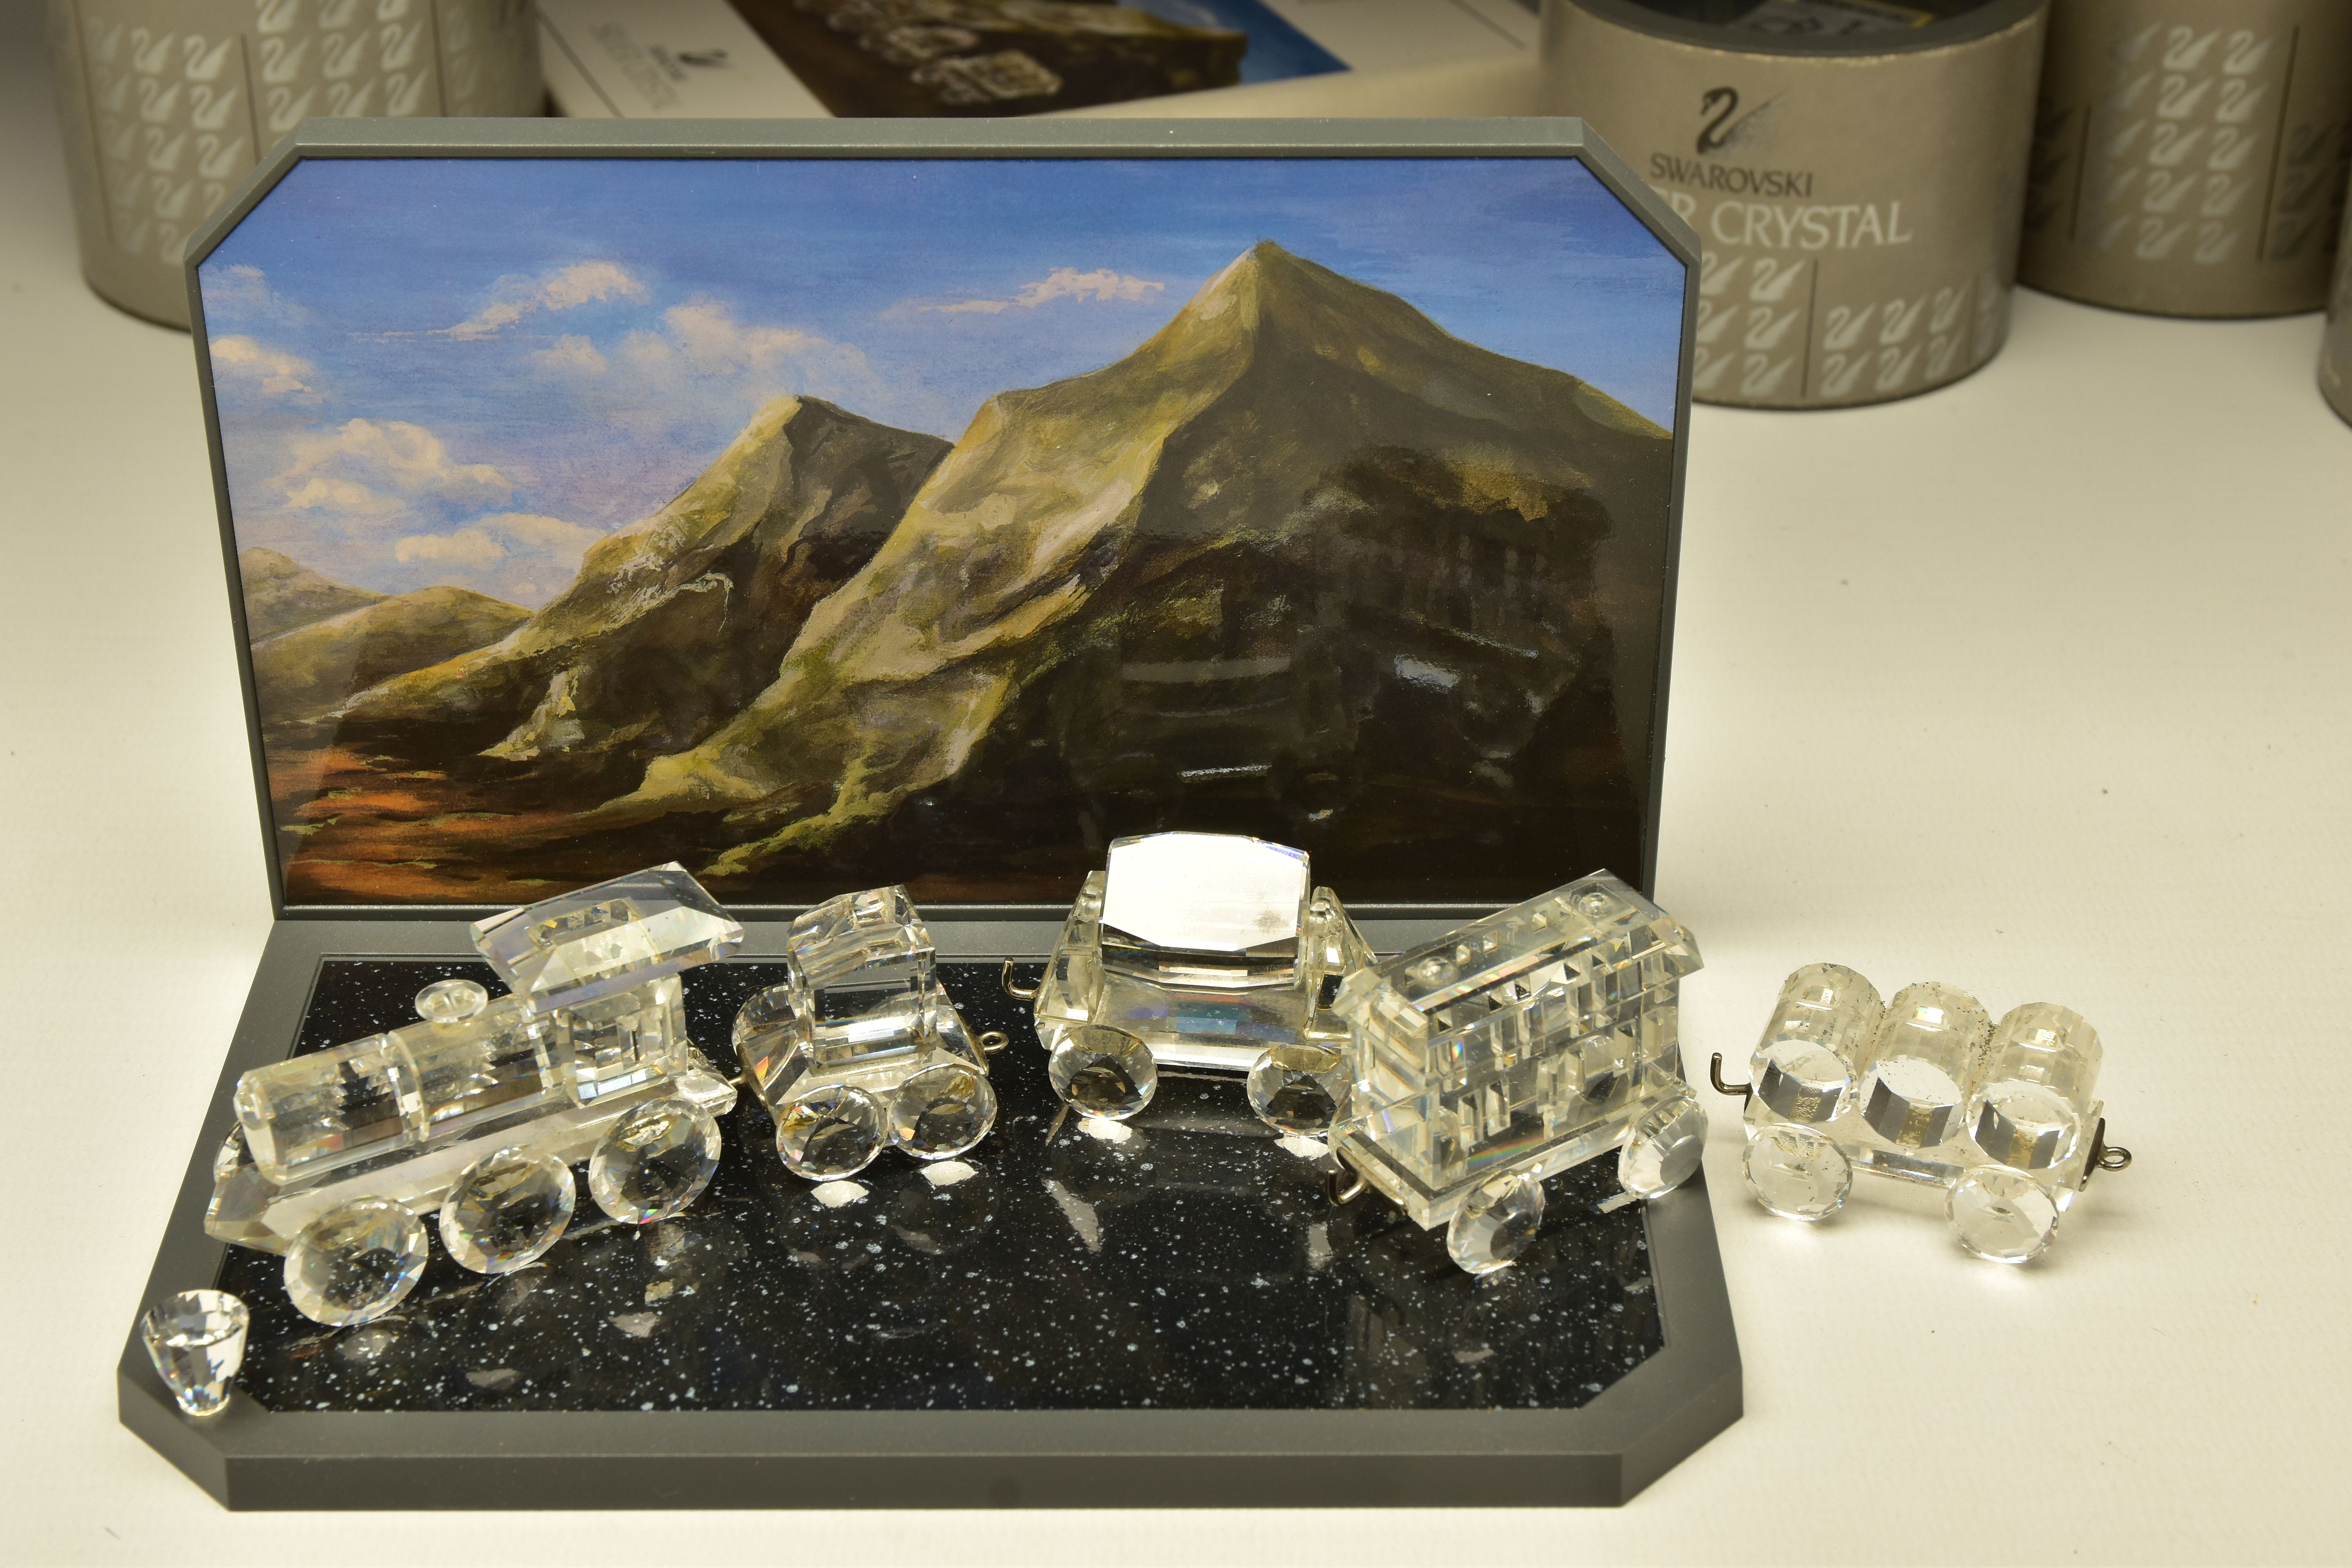 SWAROVSKI CRYSTAL EXPRESS TRAIN FROM WHEN WE WERE YOUNG SERIES, comprising boxed Locomotive (015145) - Image 5 of 5